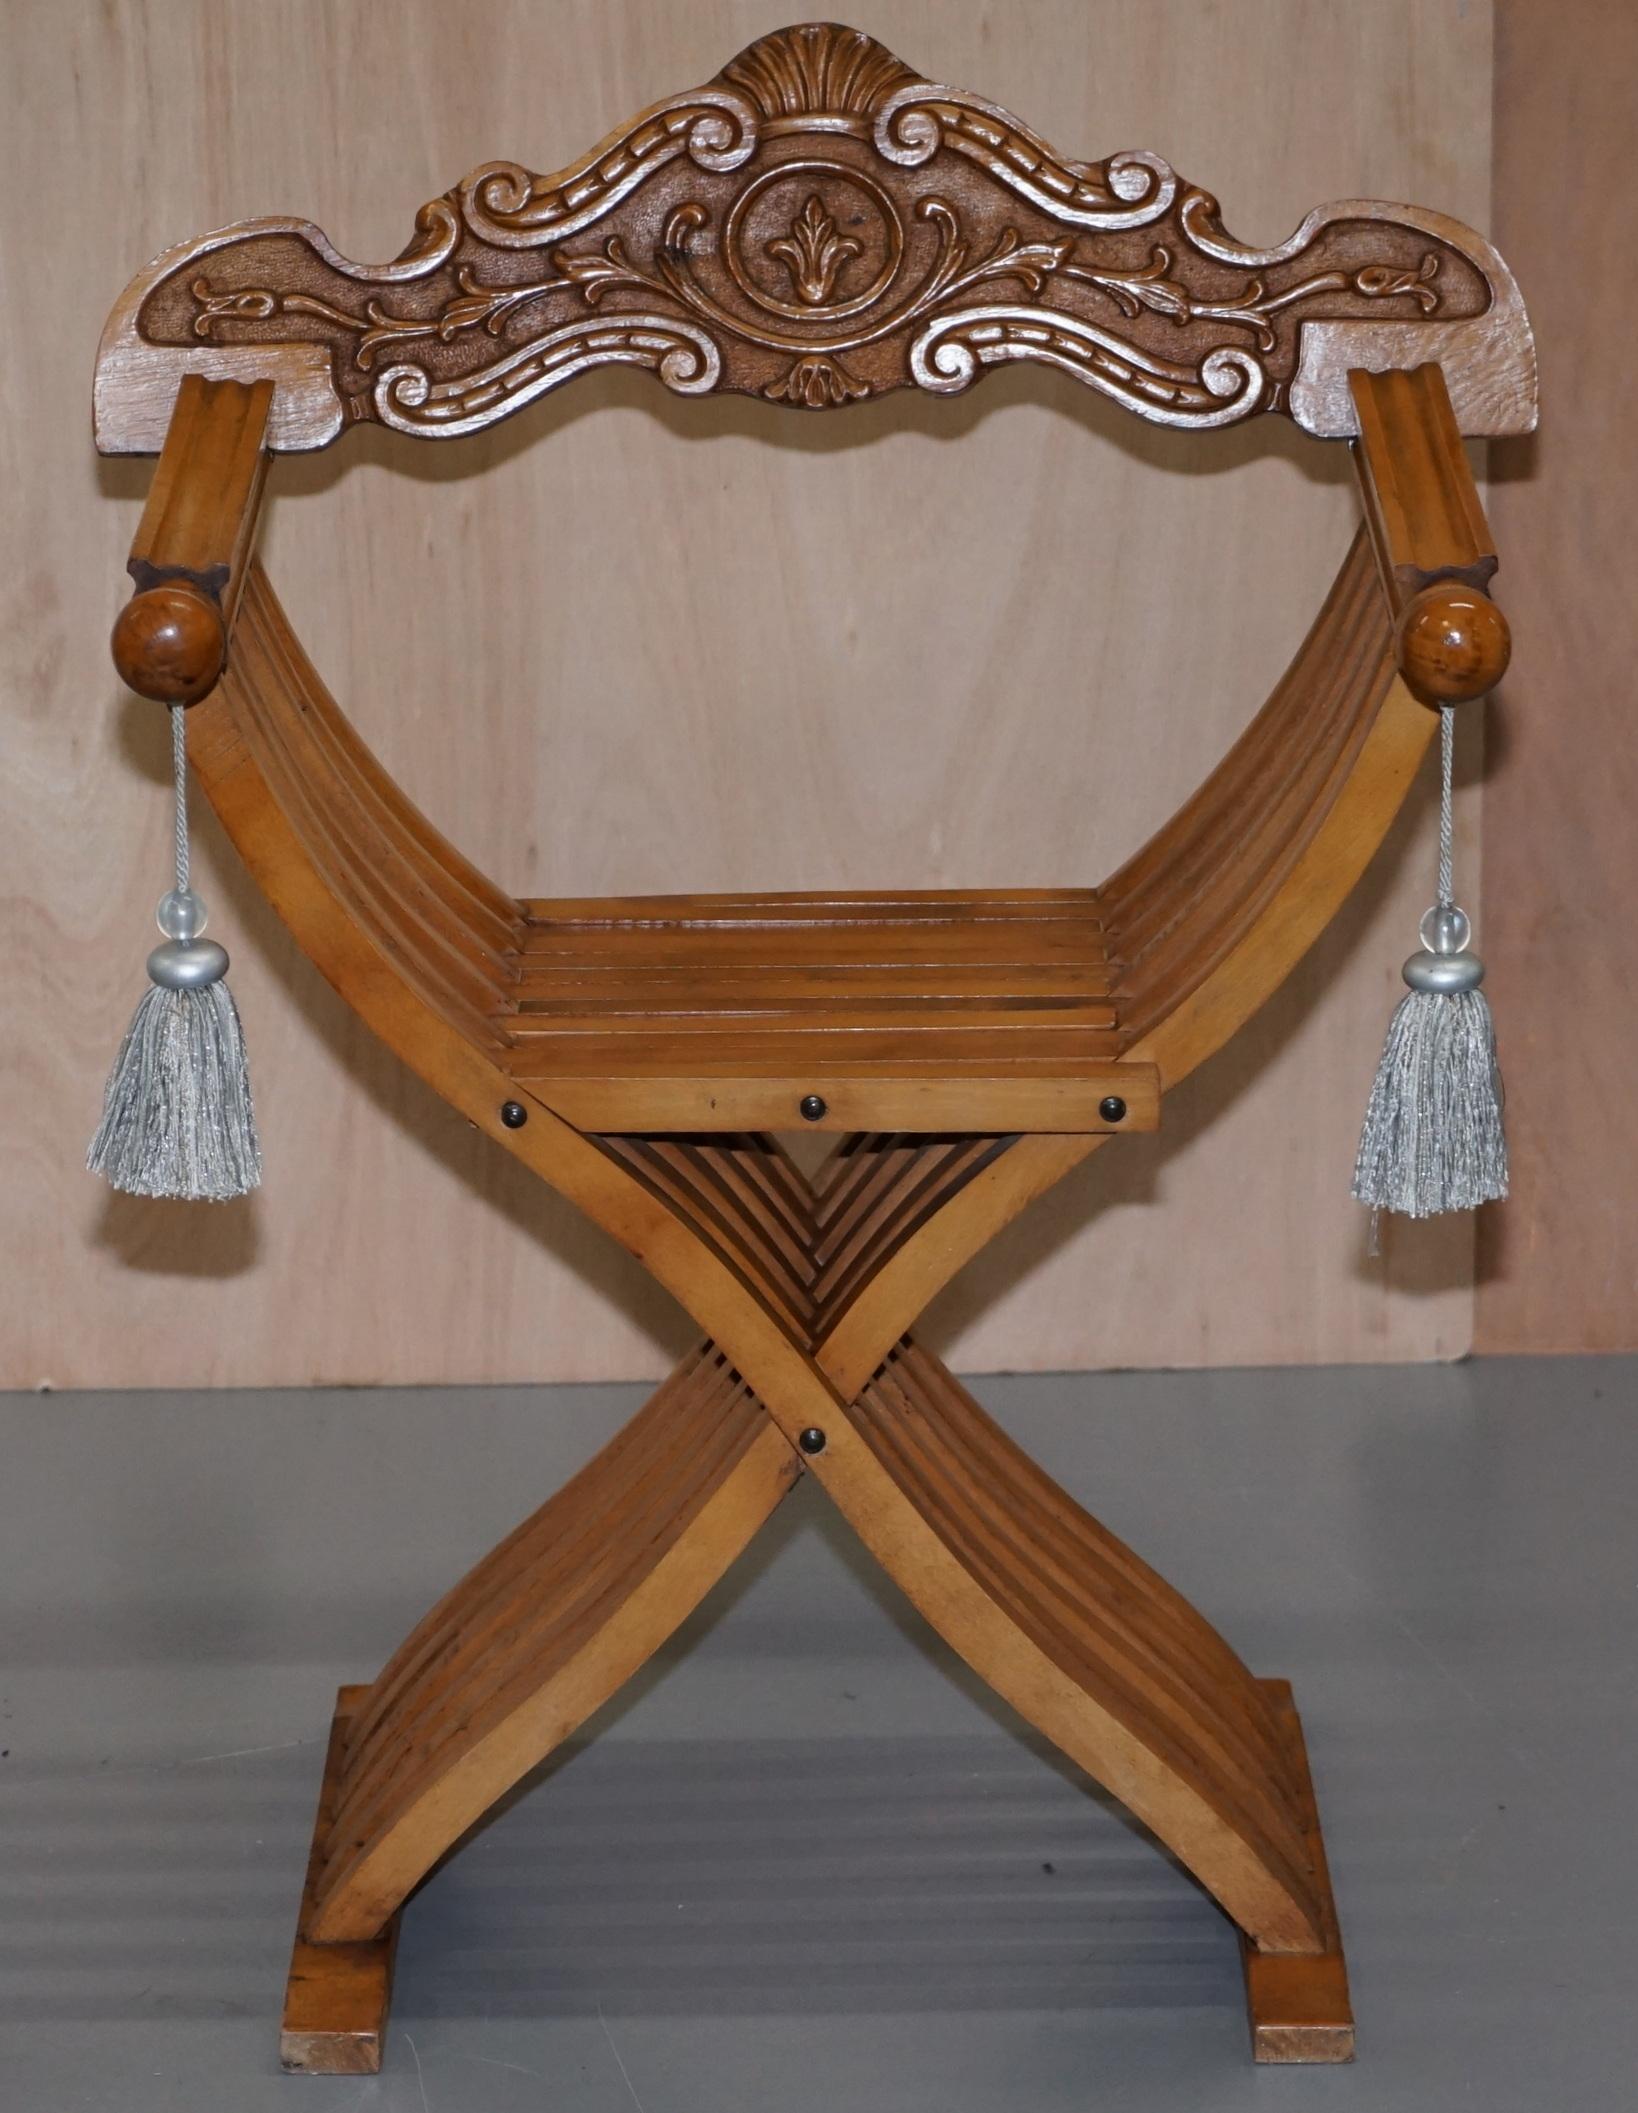 We are delighted to offer for sale one of two Savonarola armchairs

I have a pair, this auction is for the traditional chair with the rounded arms and silk tassels, the other chair which is listed under my other items has Lion head arms

These